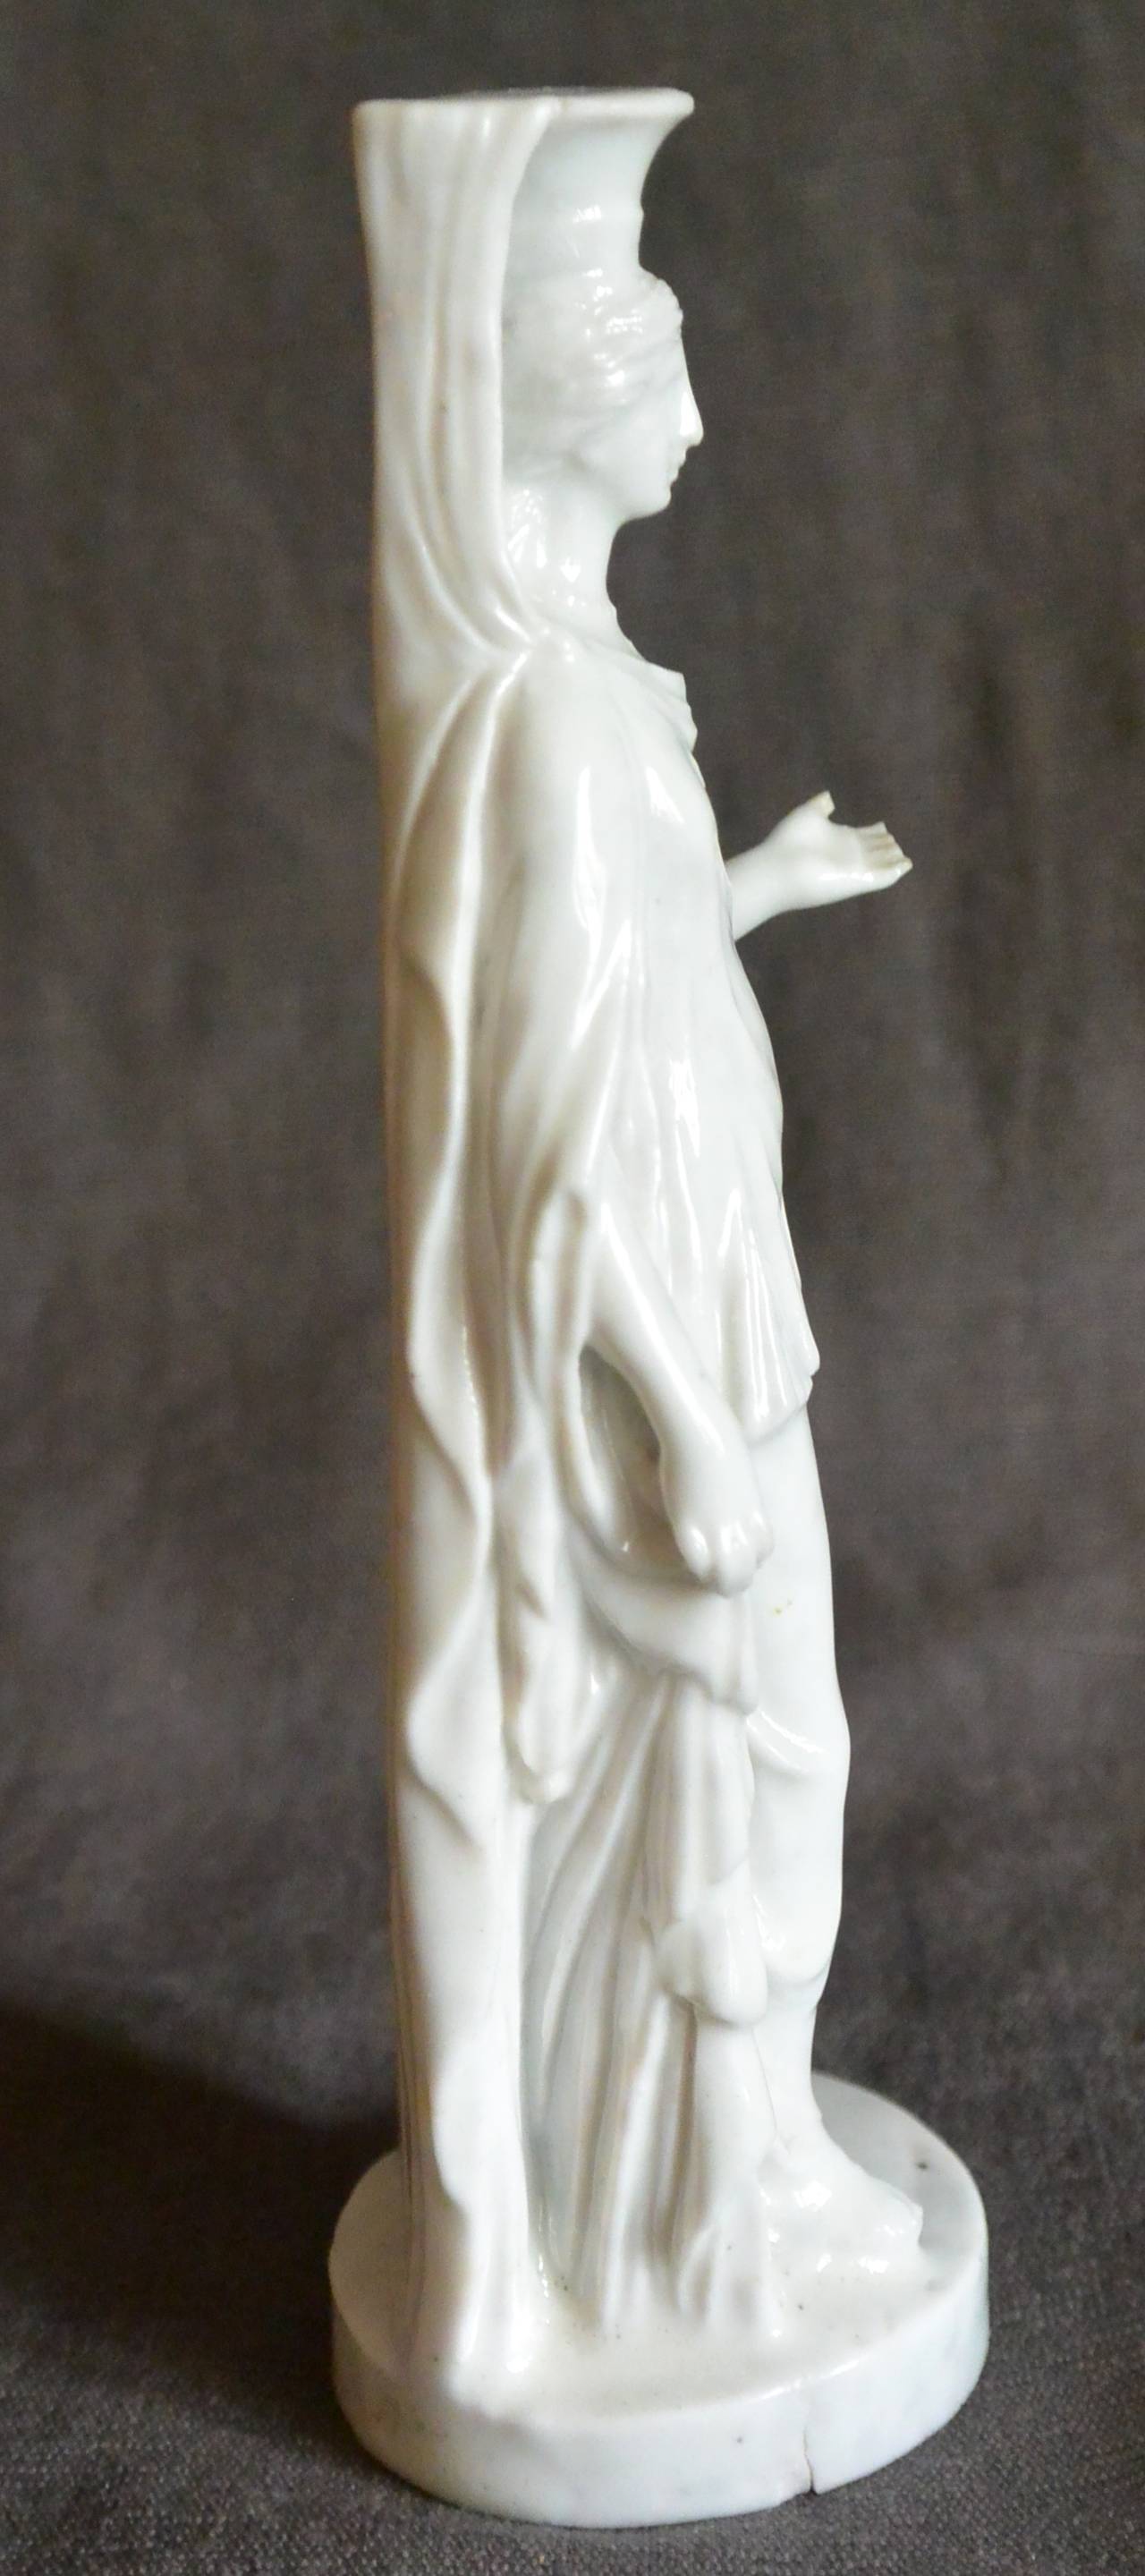 Doccia white porcelain caryatid sculpture.  A Doccia neoclassical model of a caryatid with one hand outstretched. Italy, circa 1770s 
Dimension: 2